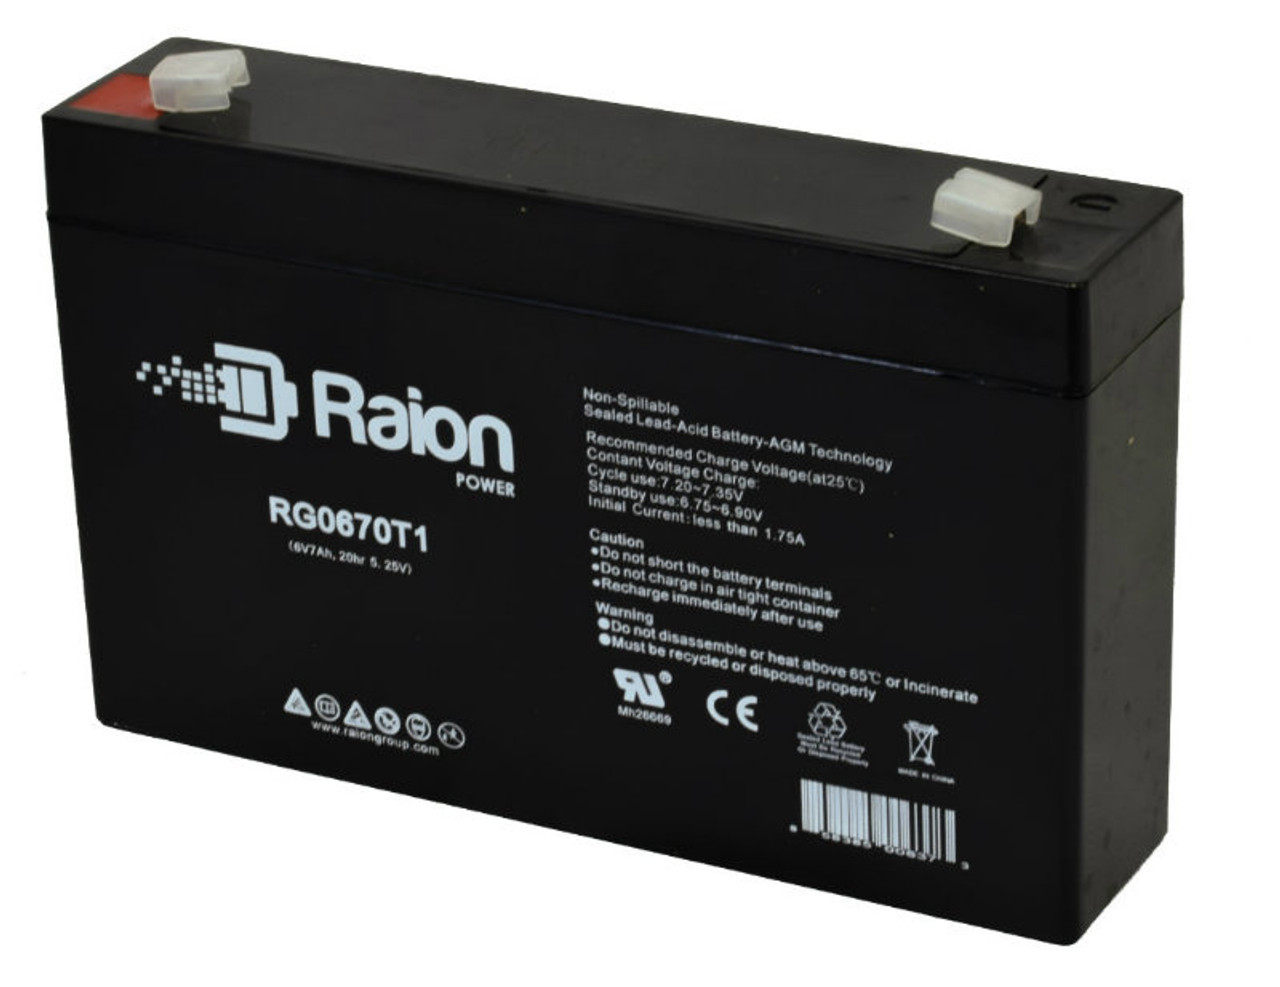 Raion Power RG0670T1 6V 7Ah Replacement Battery Cartridge for Philips Emergency Responder Medical Equipment